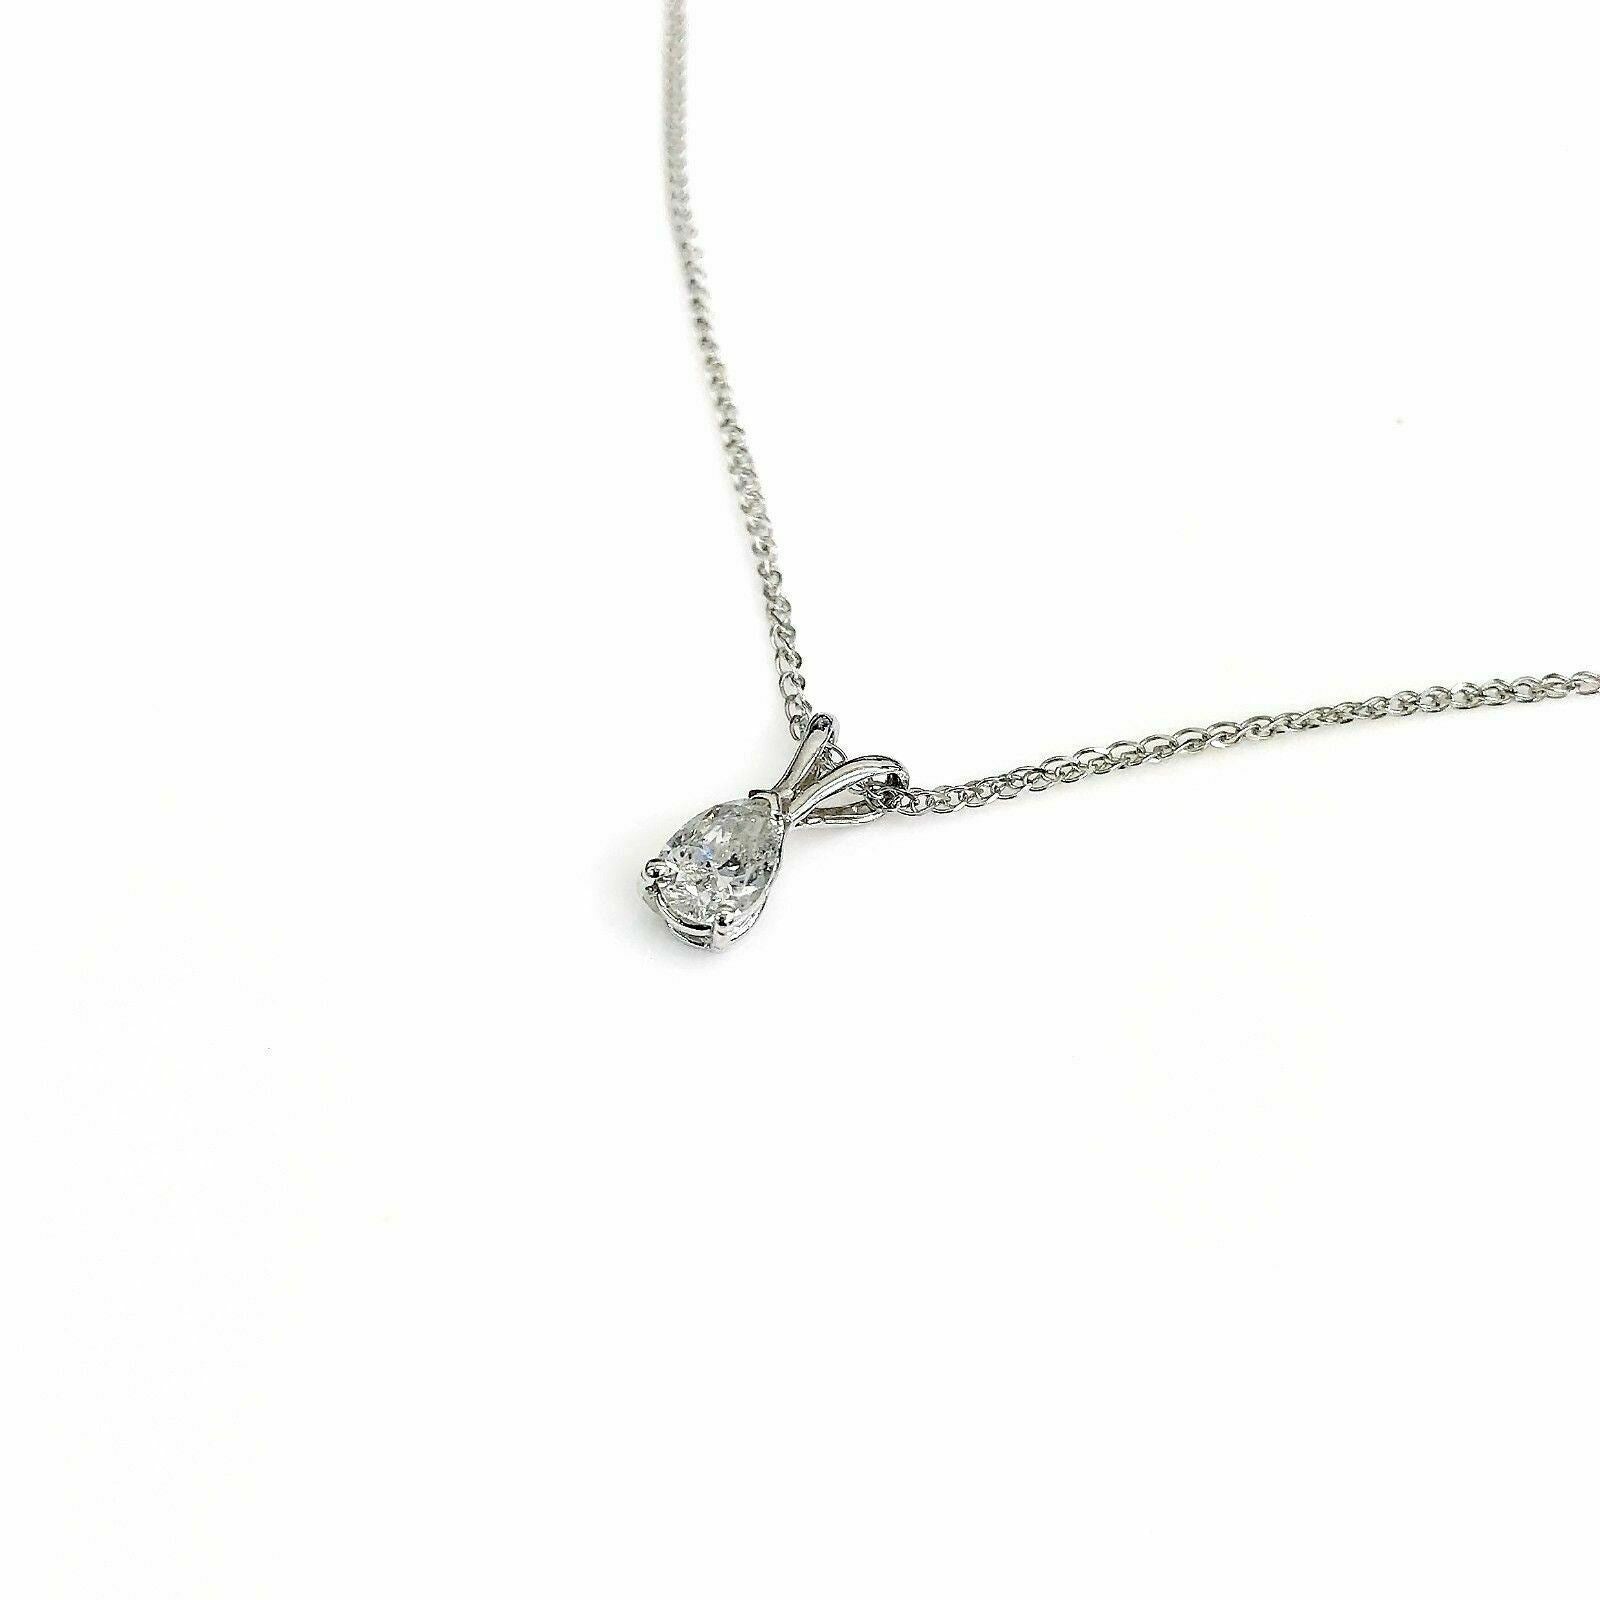 0.48 Carat Pear Diamond Solitaire Pendant with 14K White Gold Chain